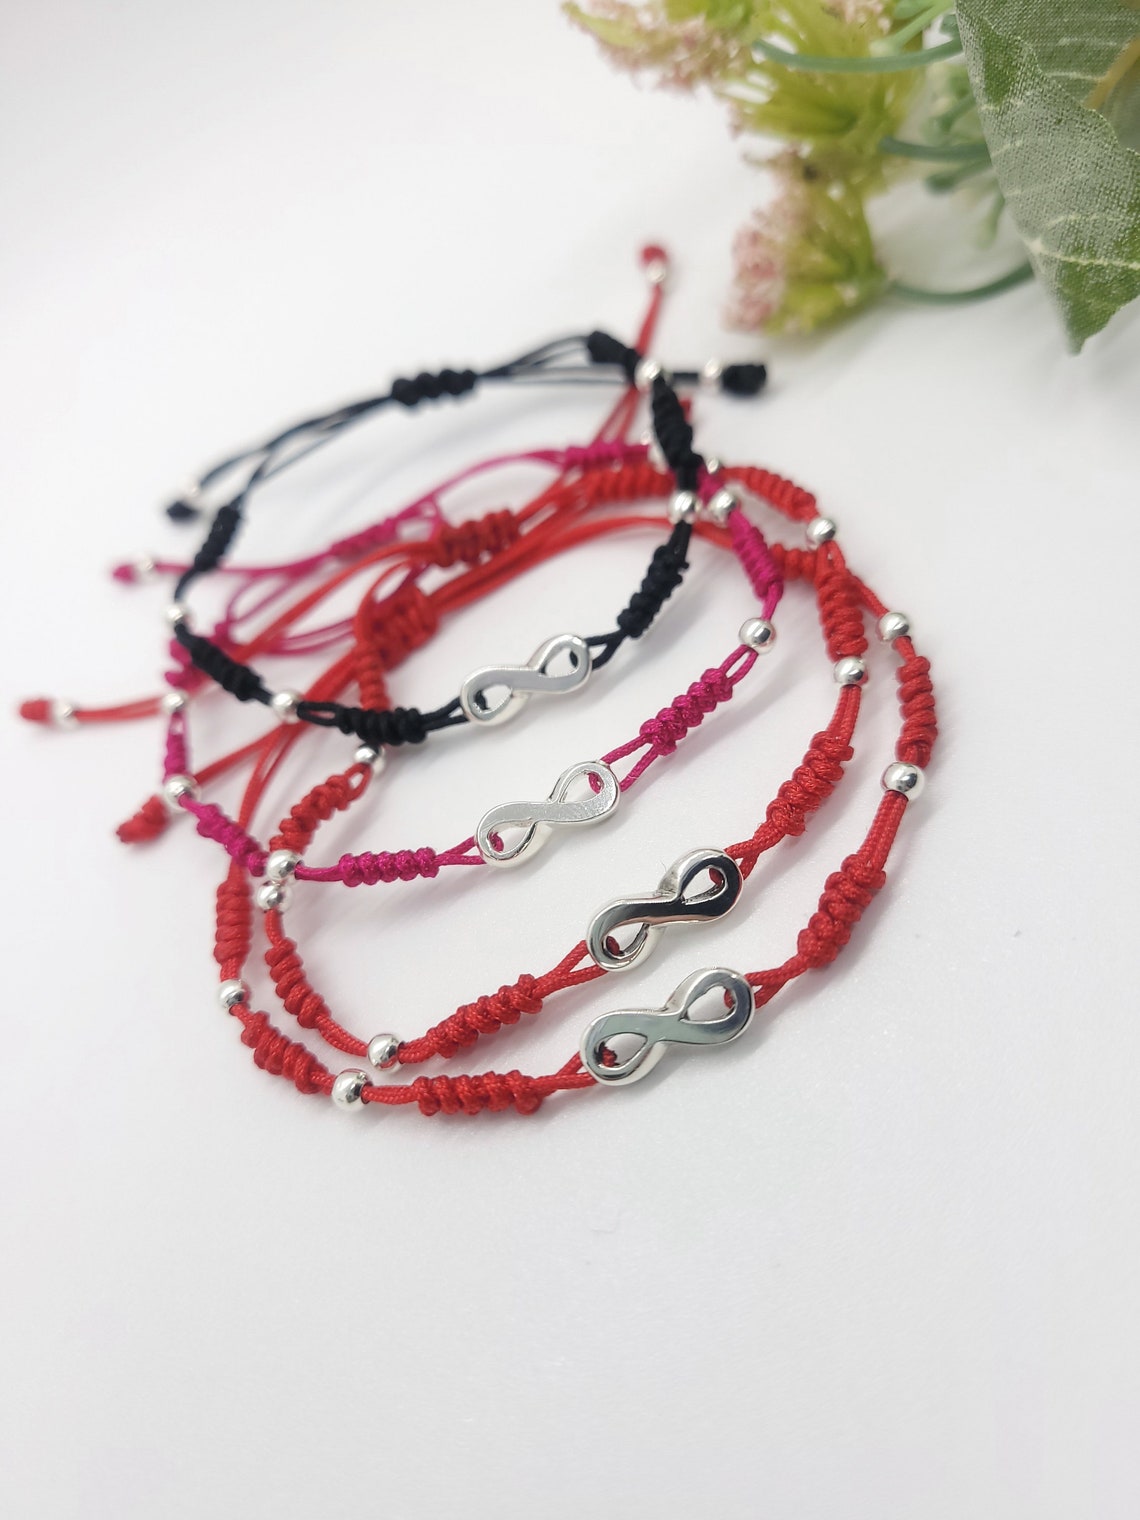 Infinity Knotted Bracelet. Chinese Knot Cord Bracelet Red - Etsy